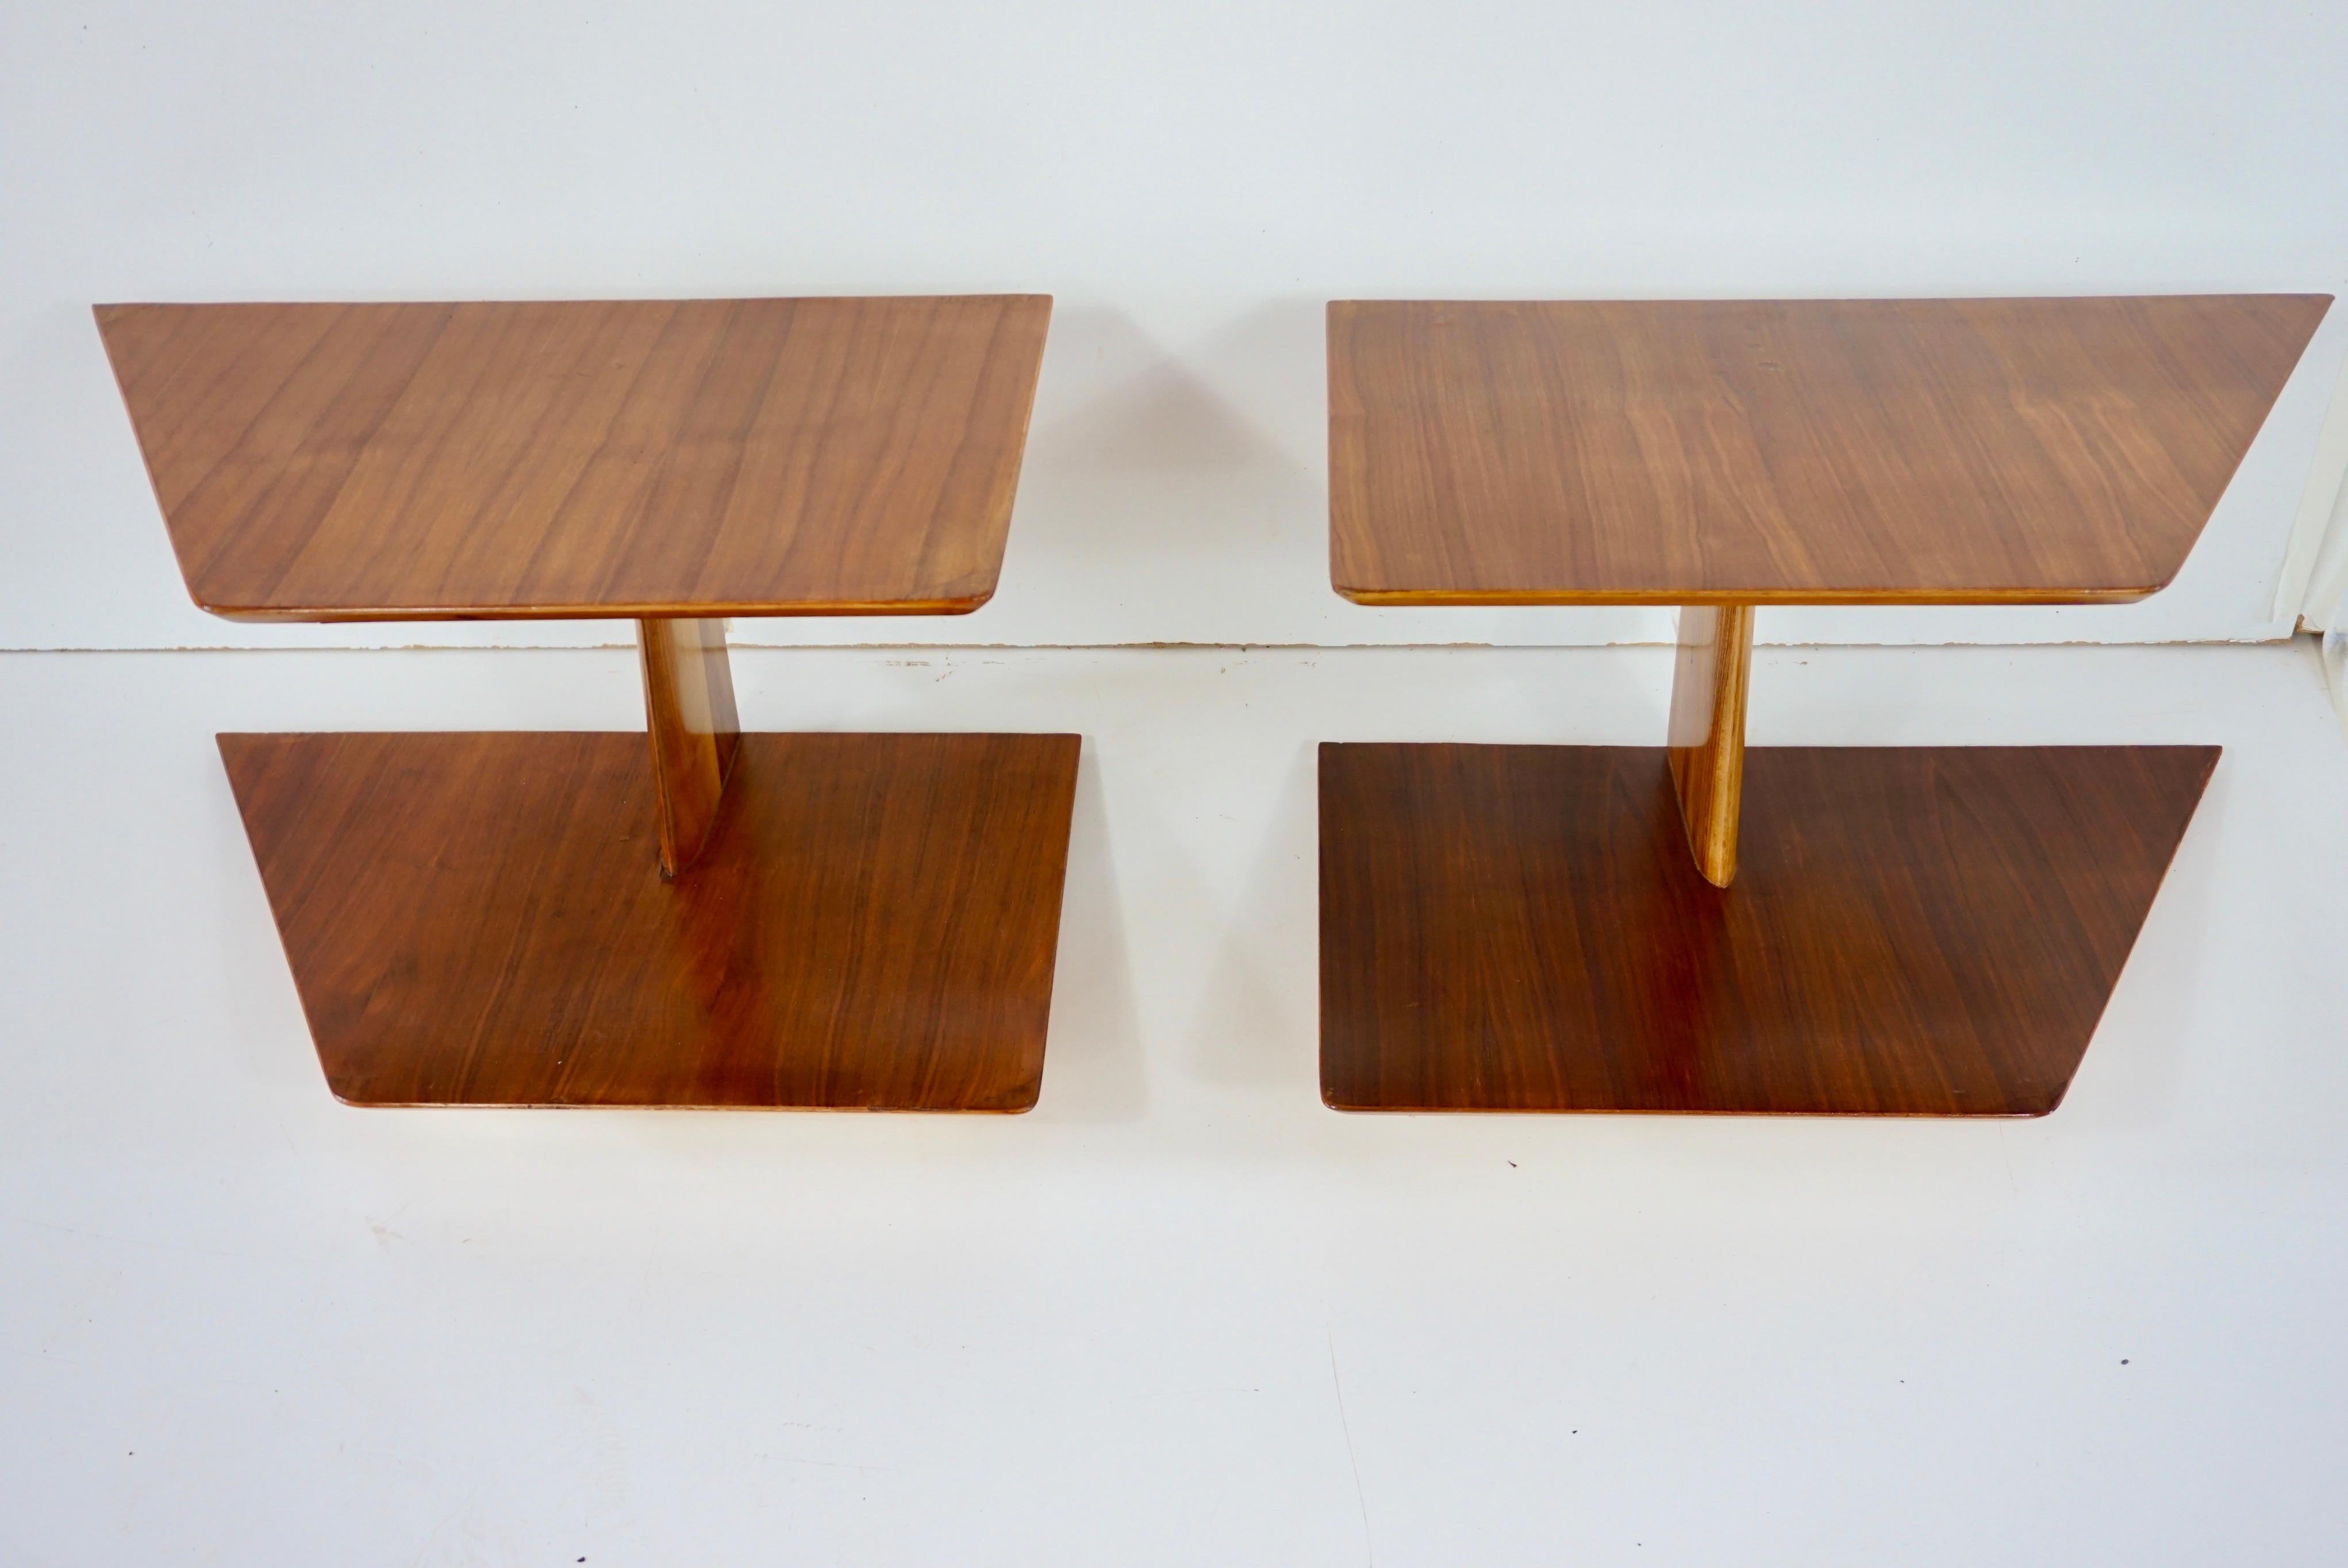 pair of hanging wood nightstands or bed side tables by Gio Ponti 
wall mounted two shelves side tables
finishing of the owl's beak top
part of a pair of  original headboards where headboards were destroyed
by Gio Ponti from the furniture of the